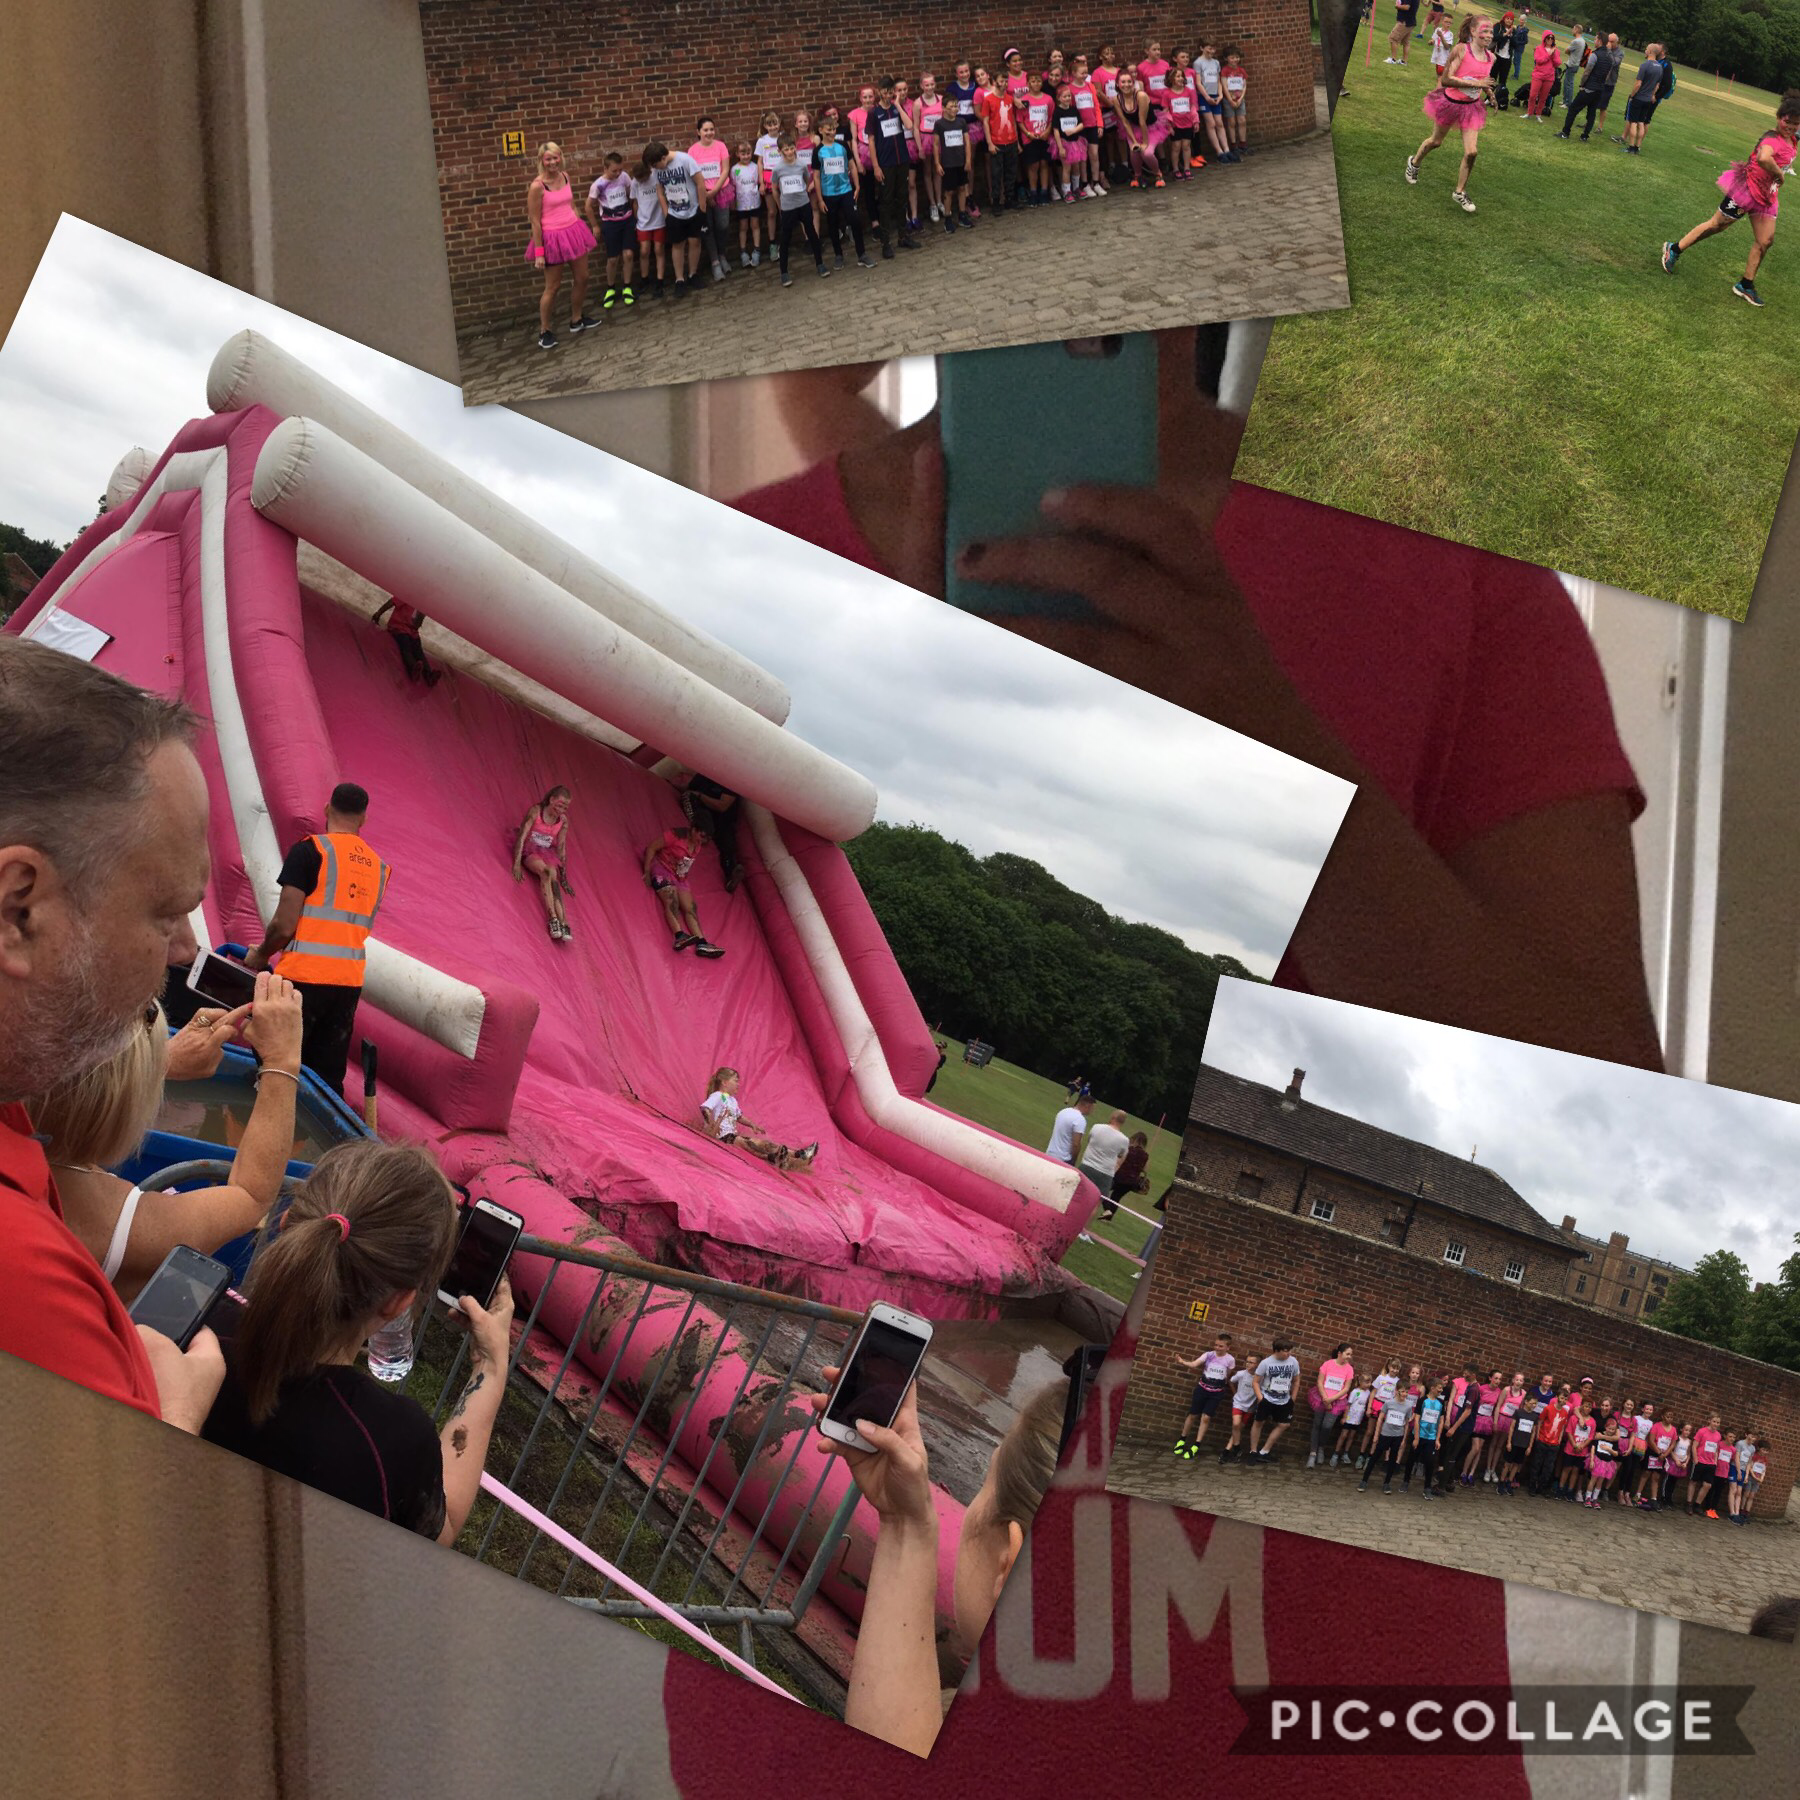 Pretty muddy 2019. Race for life.